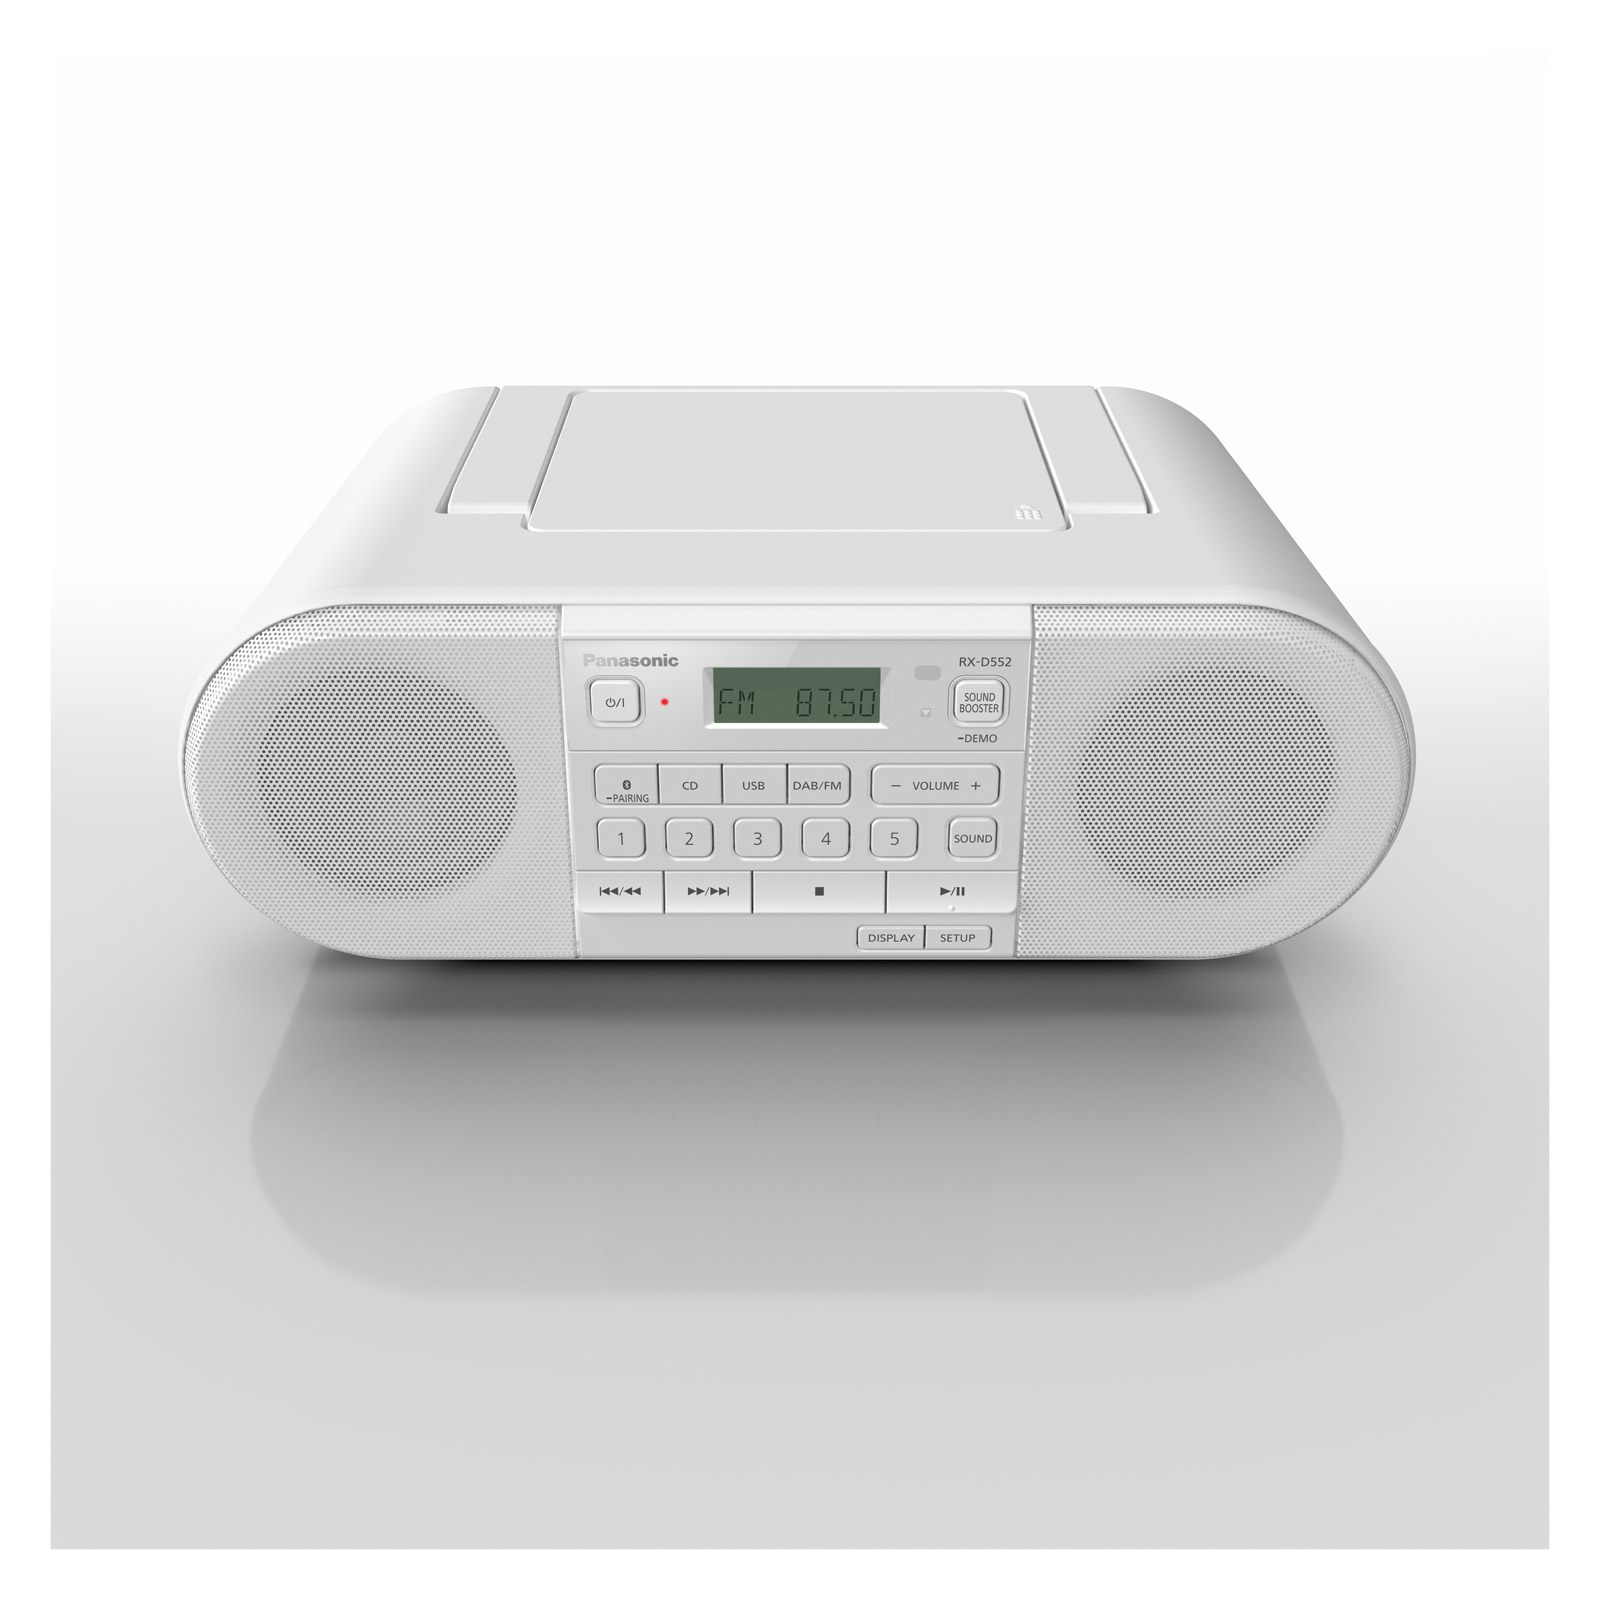 Panasonic RX D552E W Portable Stereo CD System in White DAB Bluetooth